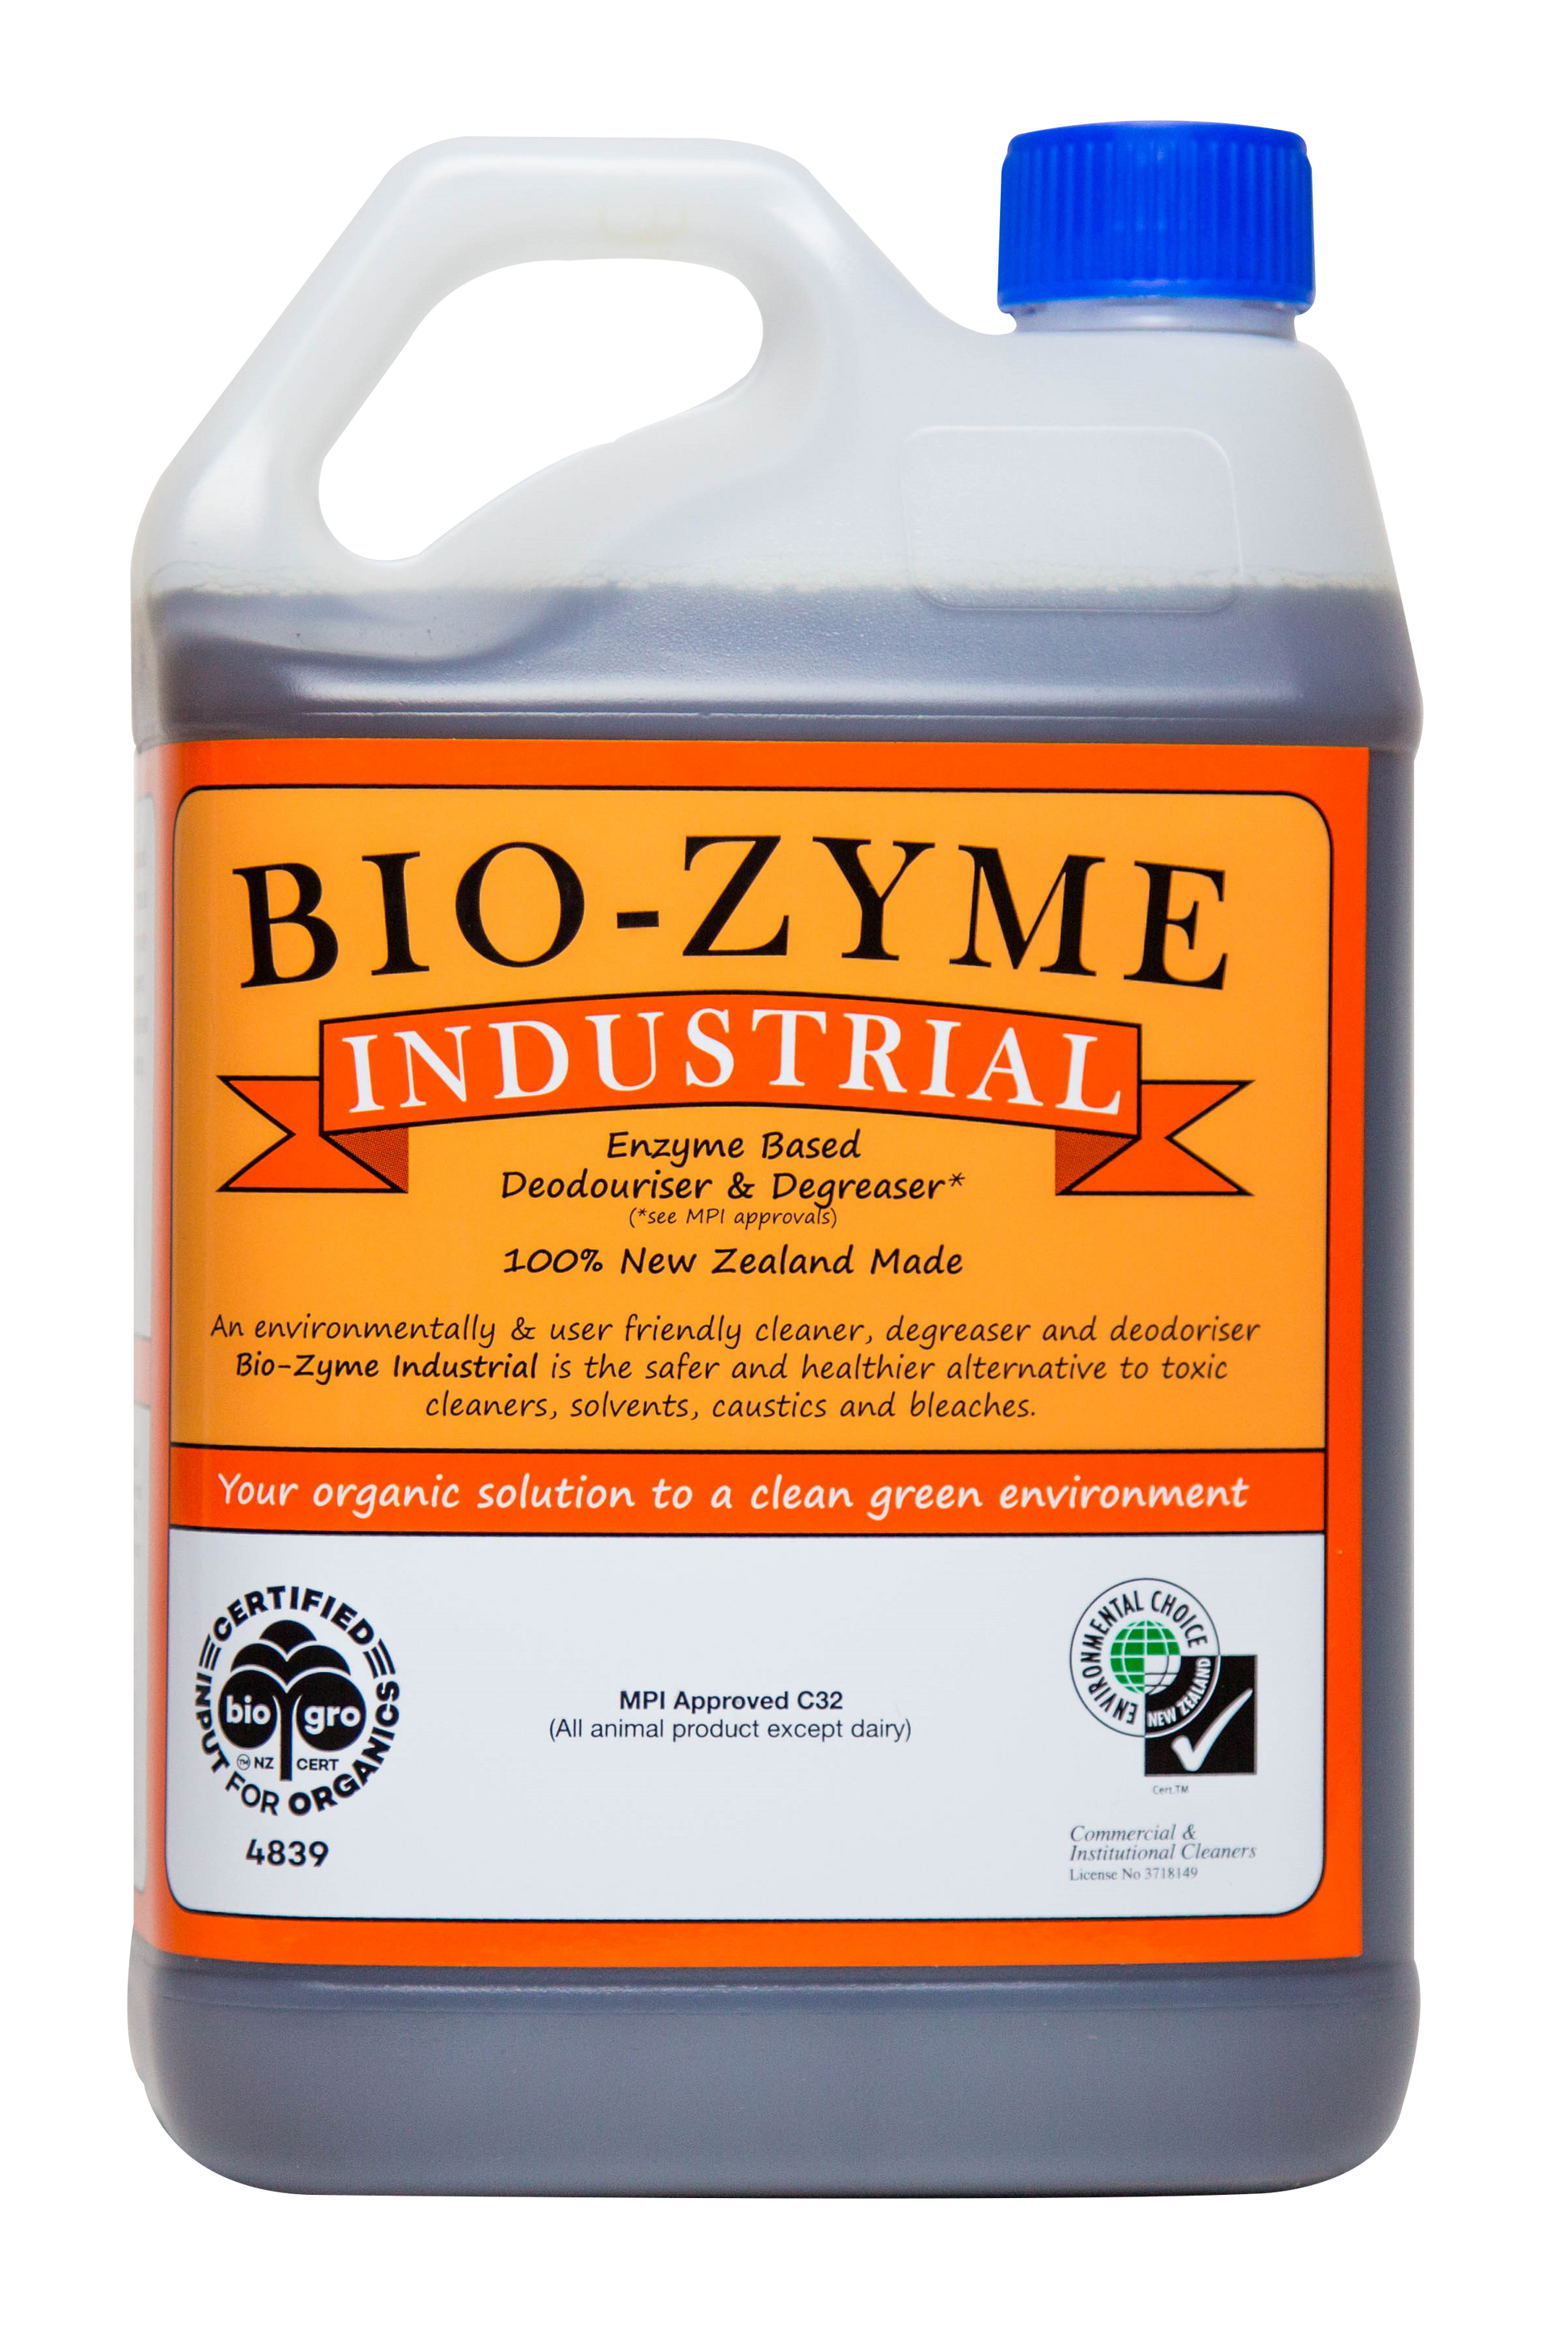 Bio-zyme 5L Industrial degreaser and deodoriser 